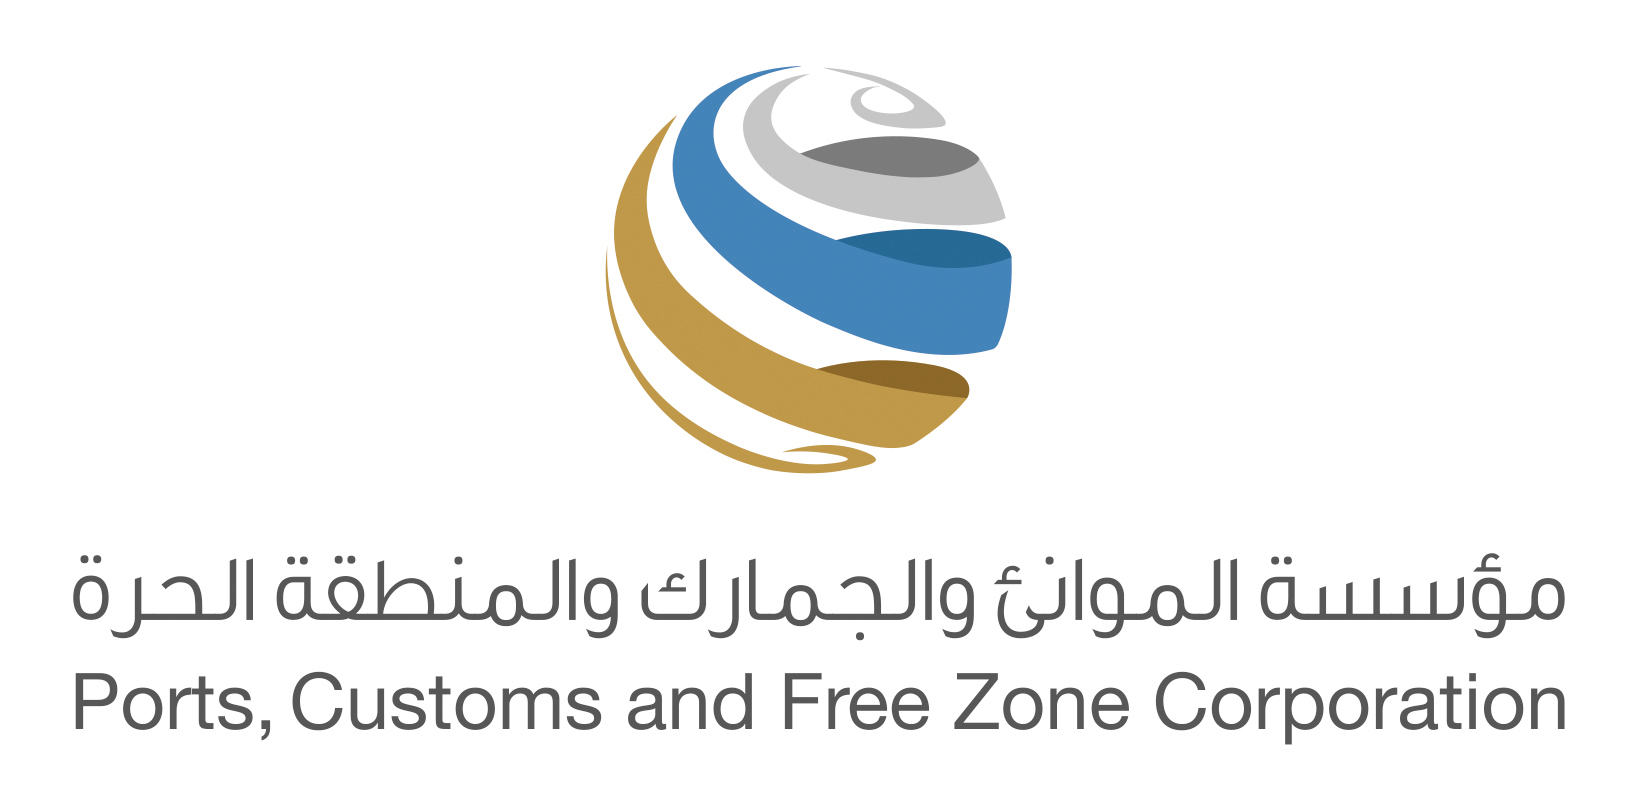 Ports, Customs and Free Zone Corporation launches its new corporate identity